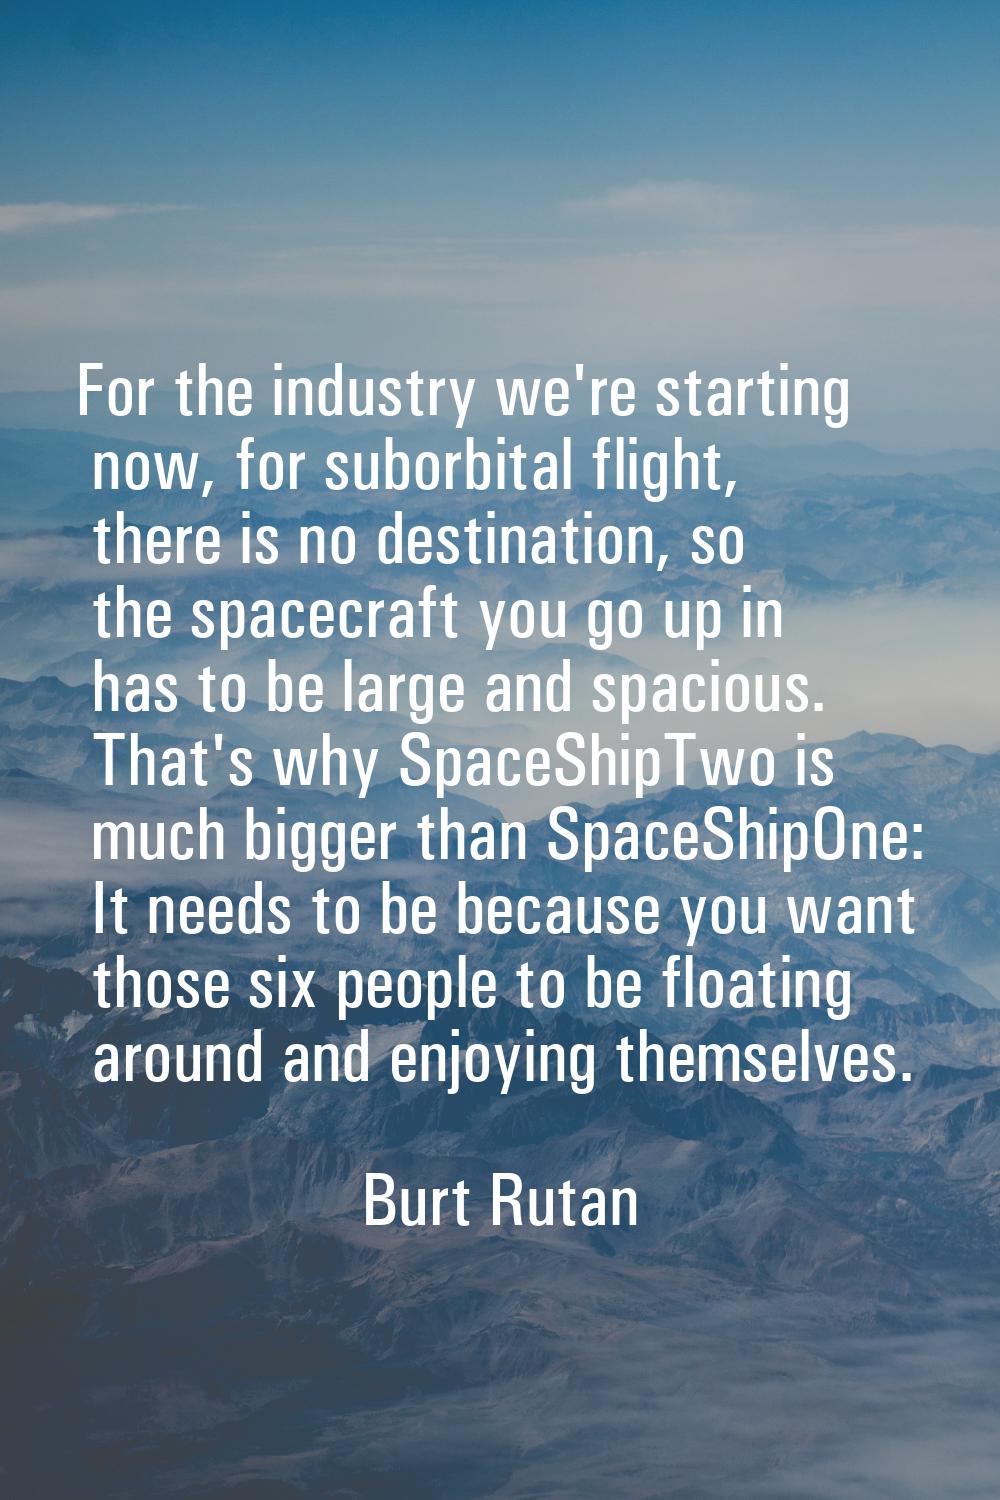 For the industry we're starting now, for suborbital flight, there is no destination, so the spacecr